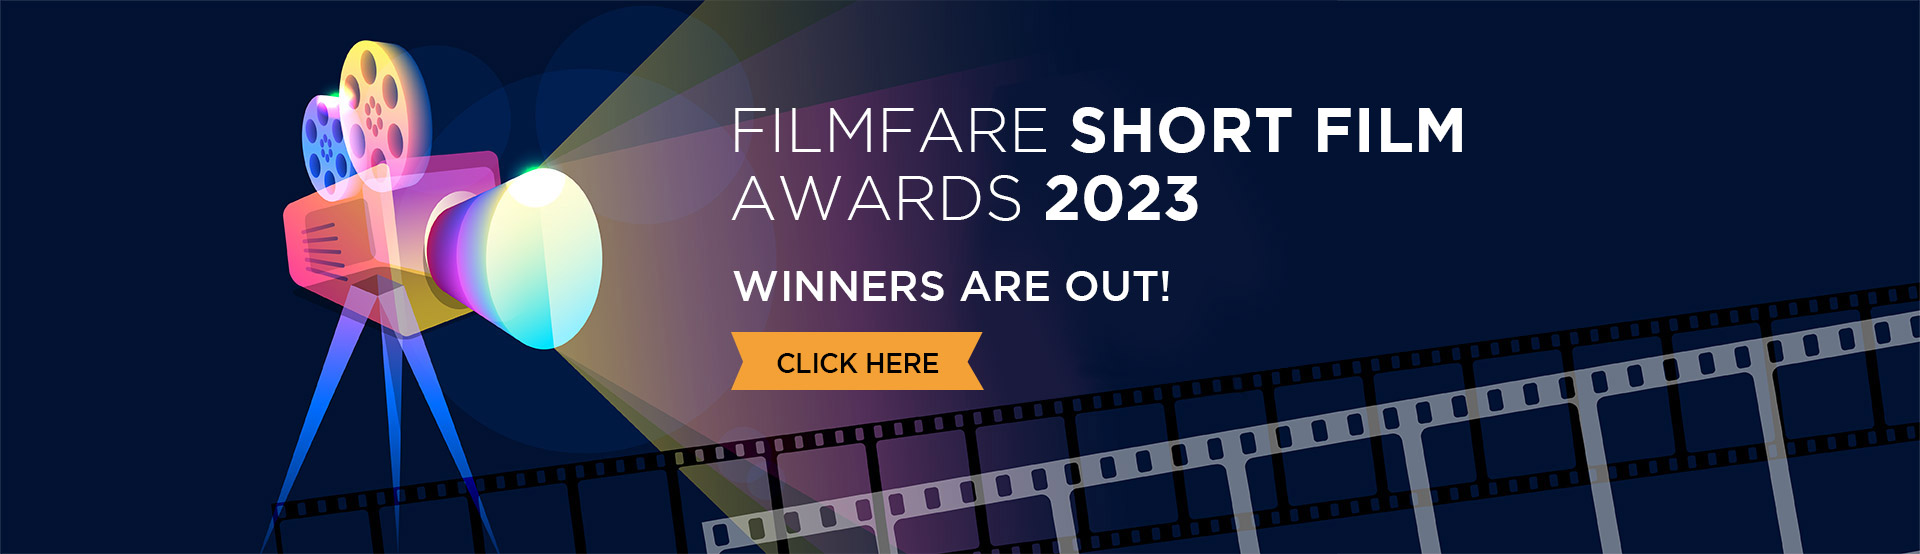 Vote for your favourite SHORT FILM NOW